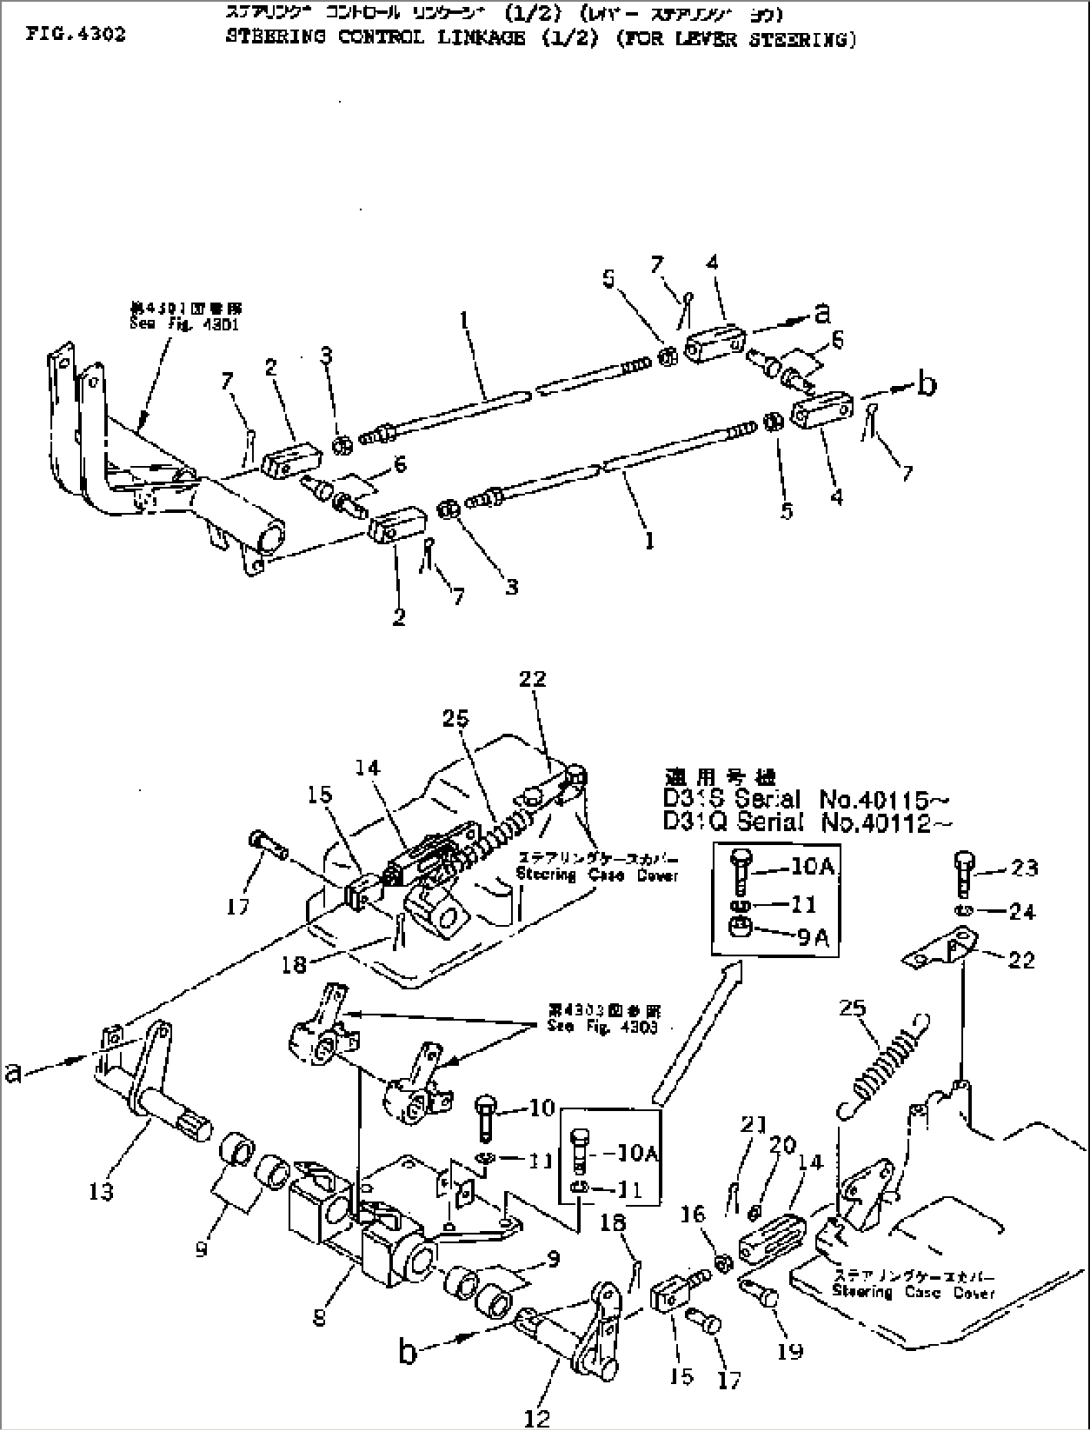 STEERING CONTROL LINKAGE (1/2) (FOR LEVER STEERING)